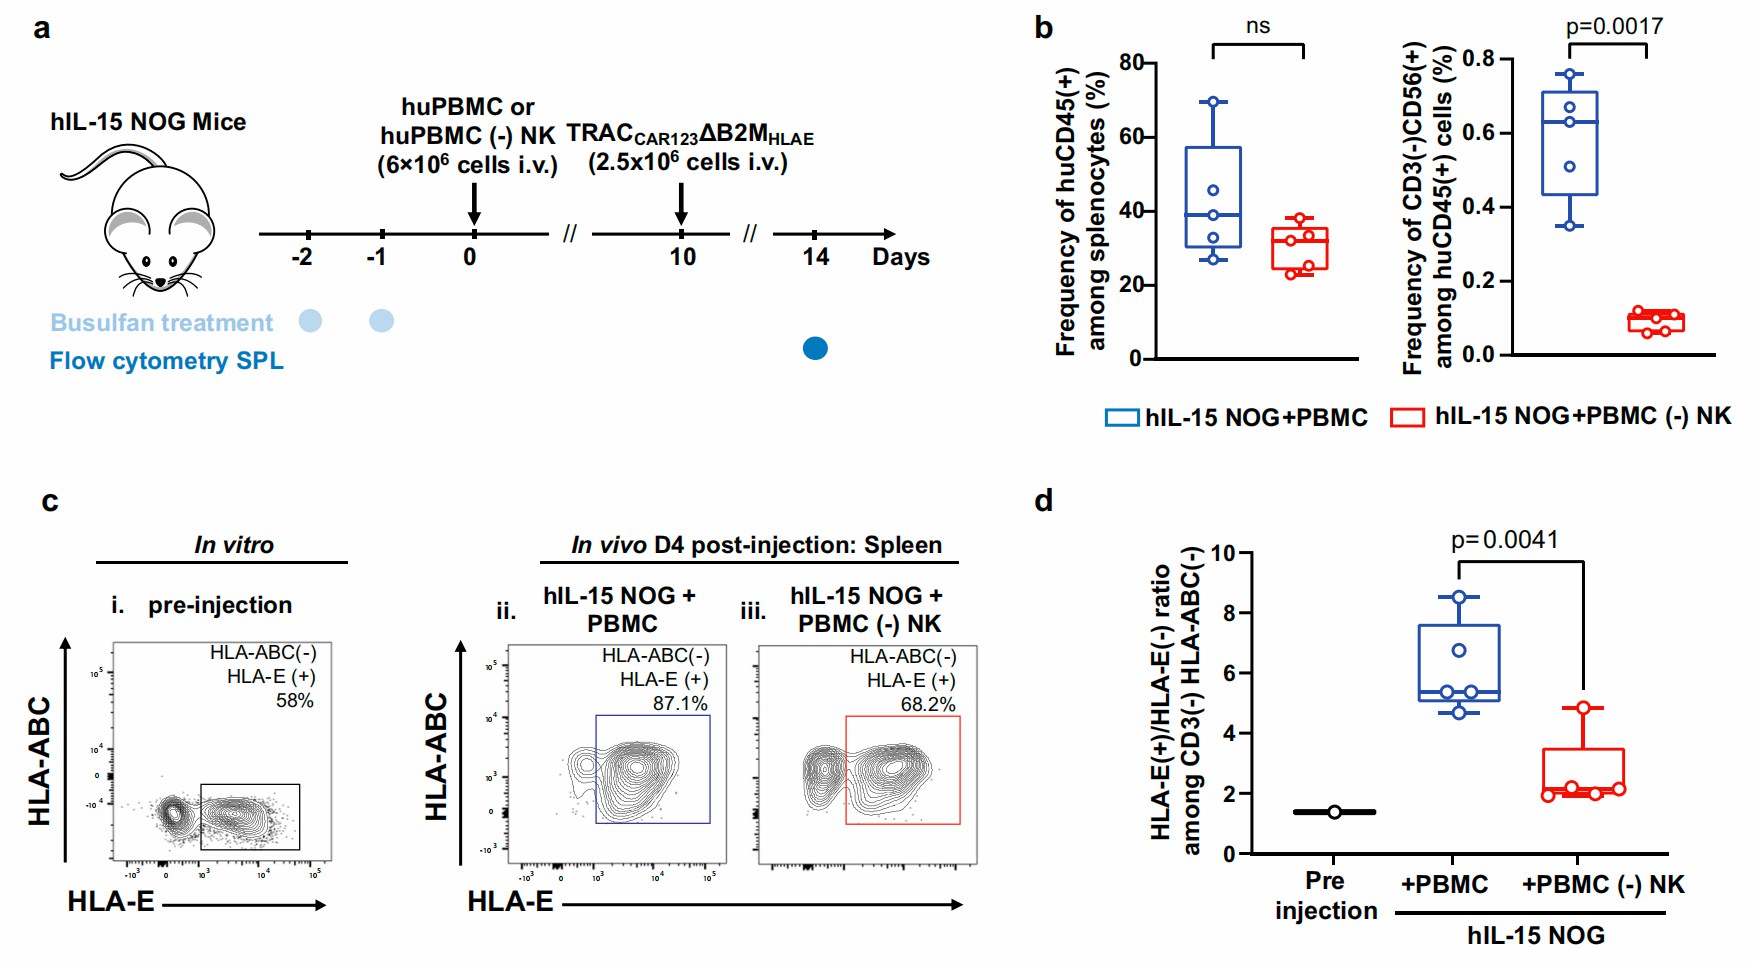 HLA-E expression at disrupted B2M loci endowed CAR-T cells improved antitumor functions in vivo. (Jo, et al., 2022)